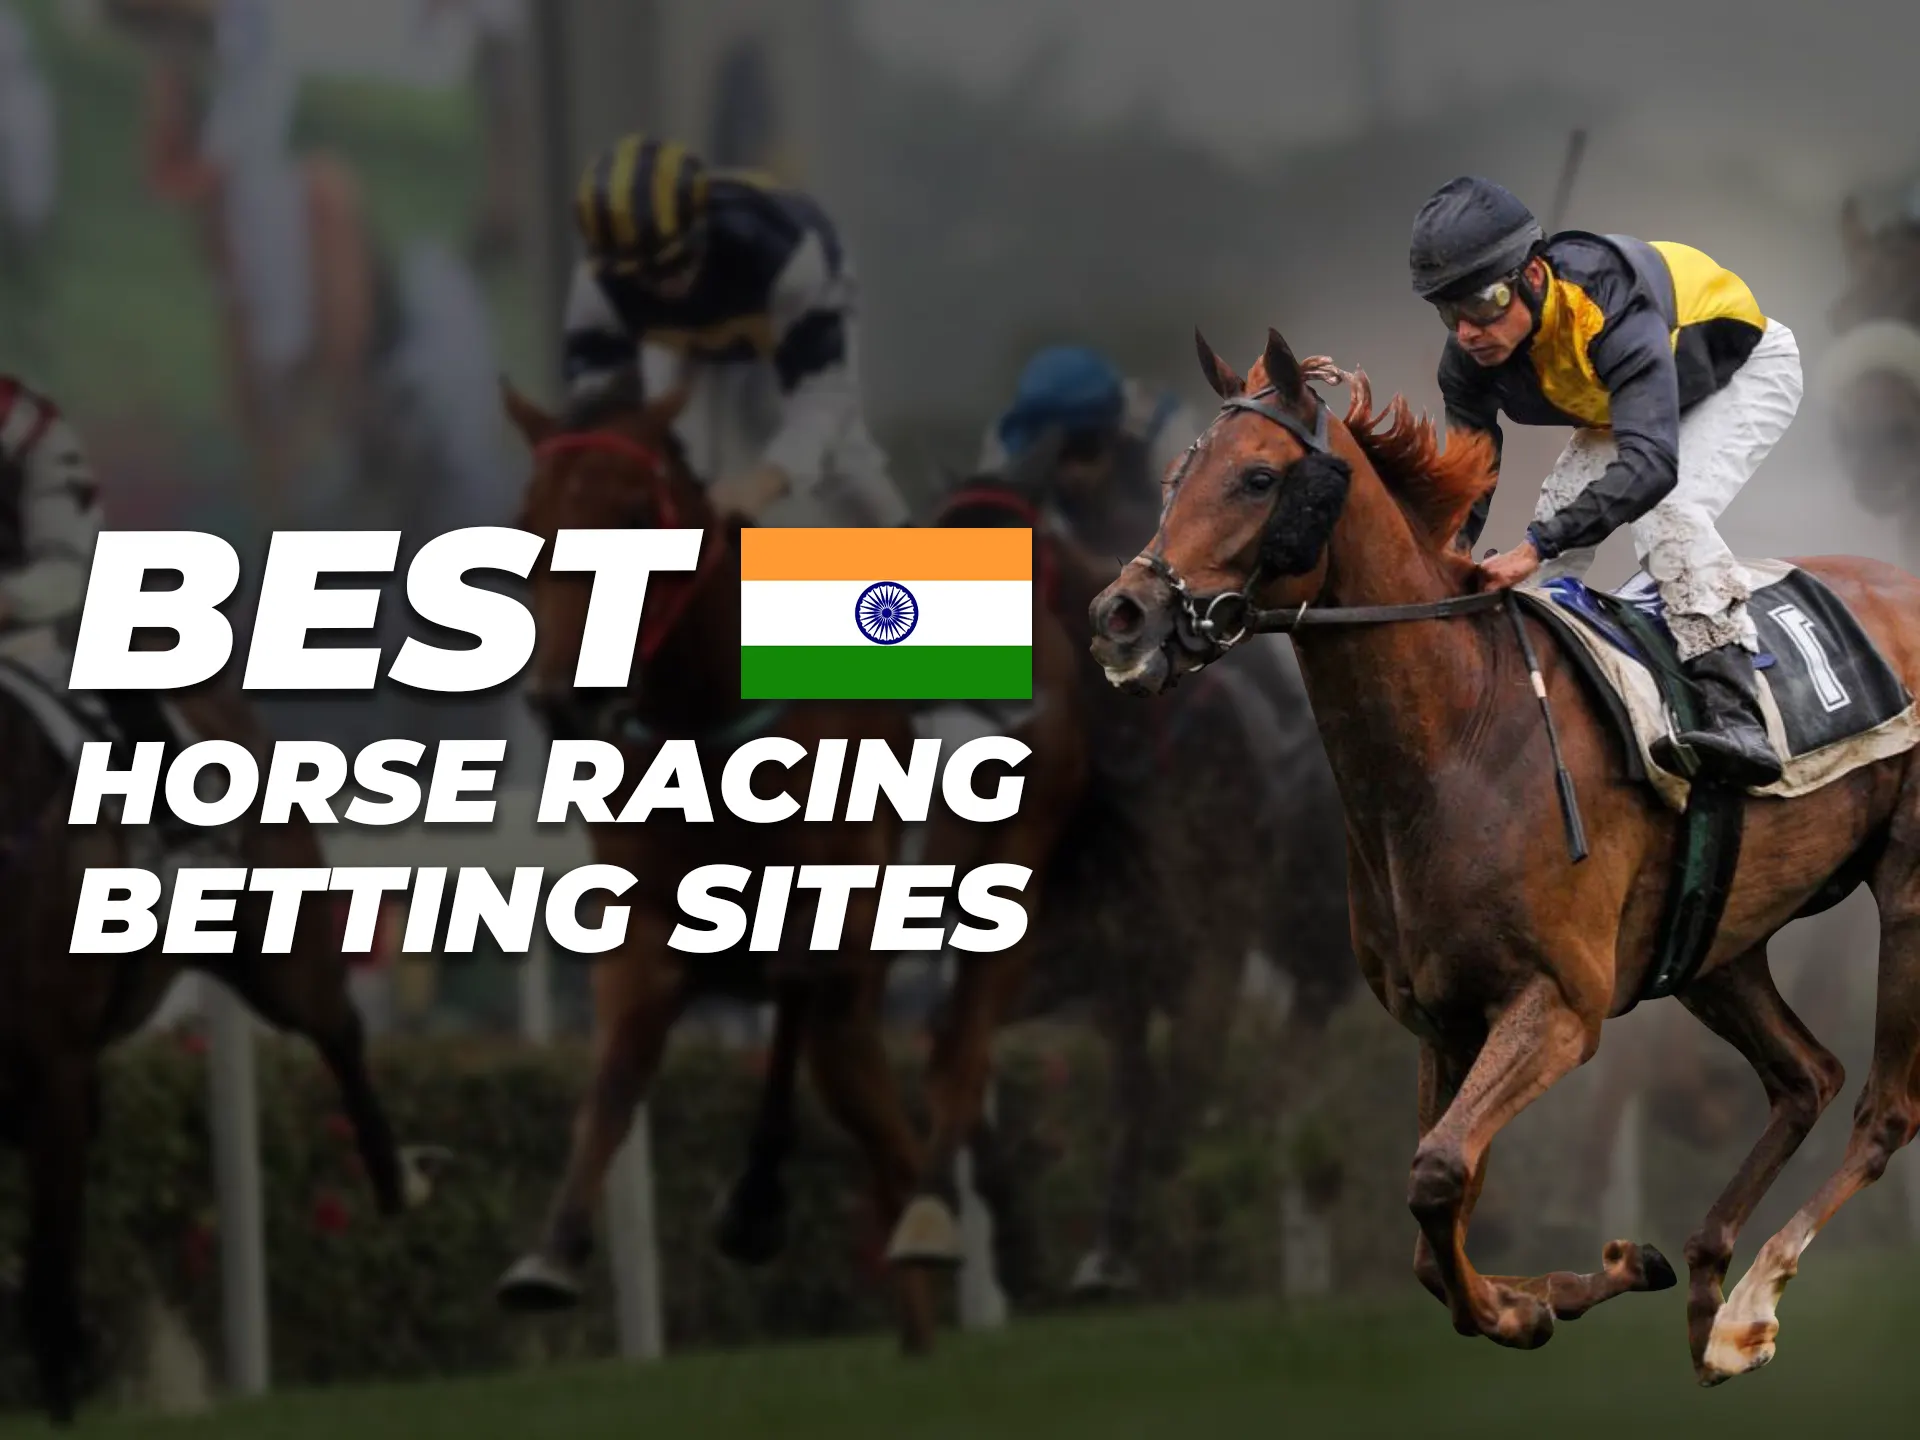 The best horse racing betting sites for connoisseurs of the sport.